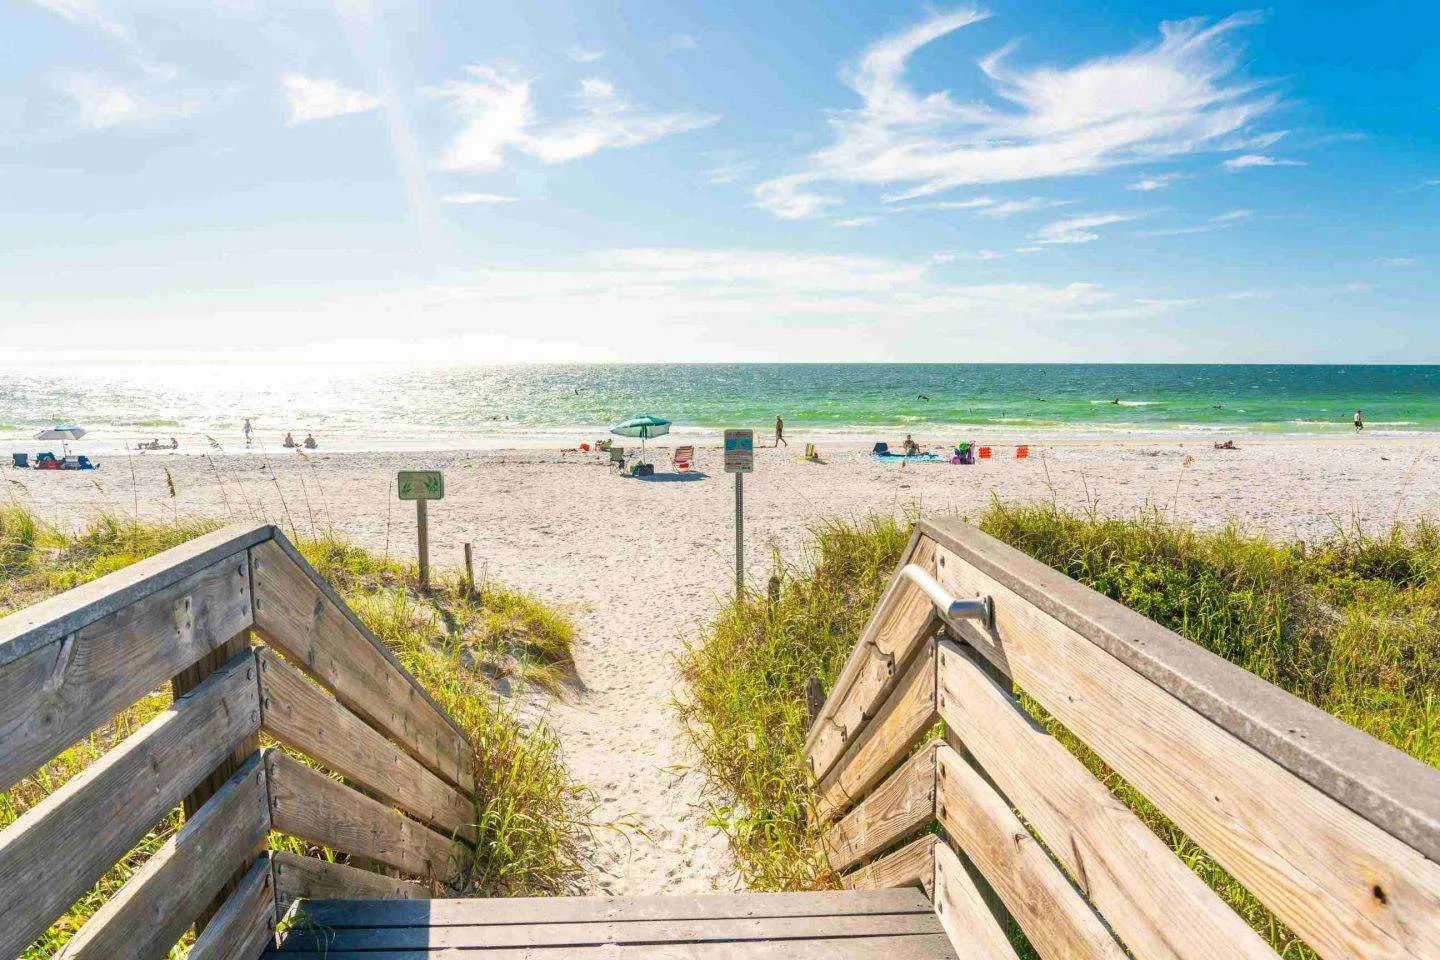 Looking for the best beaches in Tampa Florida? Well, look no further because this epic guide covers everything you need to know including the stunning hidden gem beach in Tampa, Indian Rocks beach